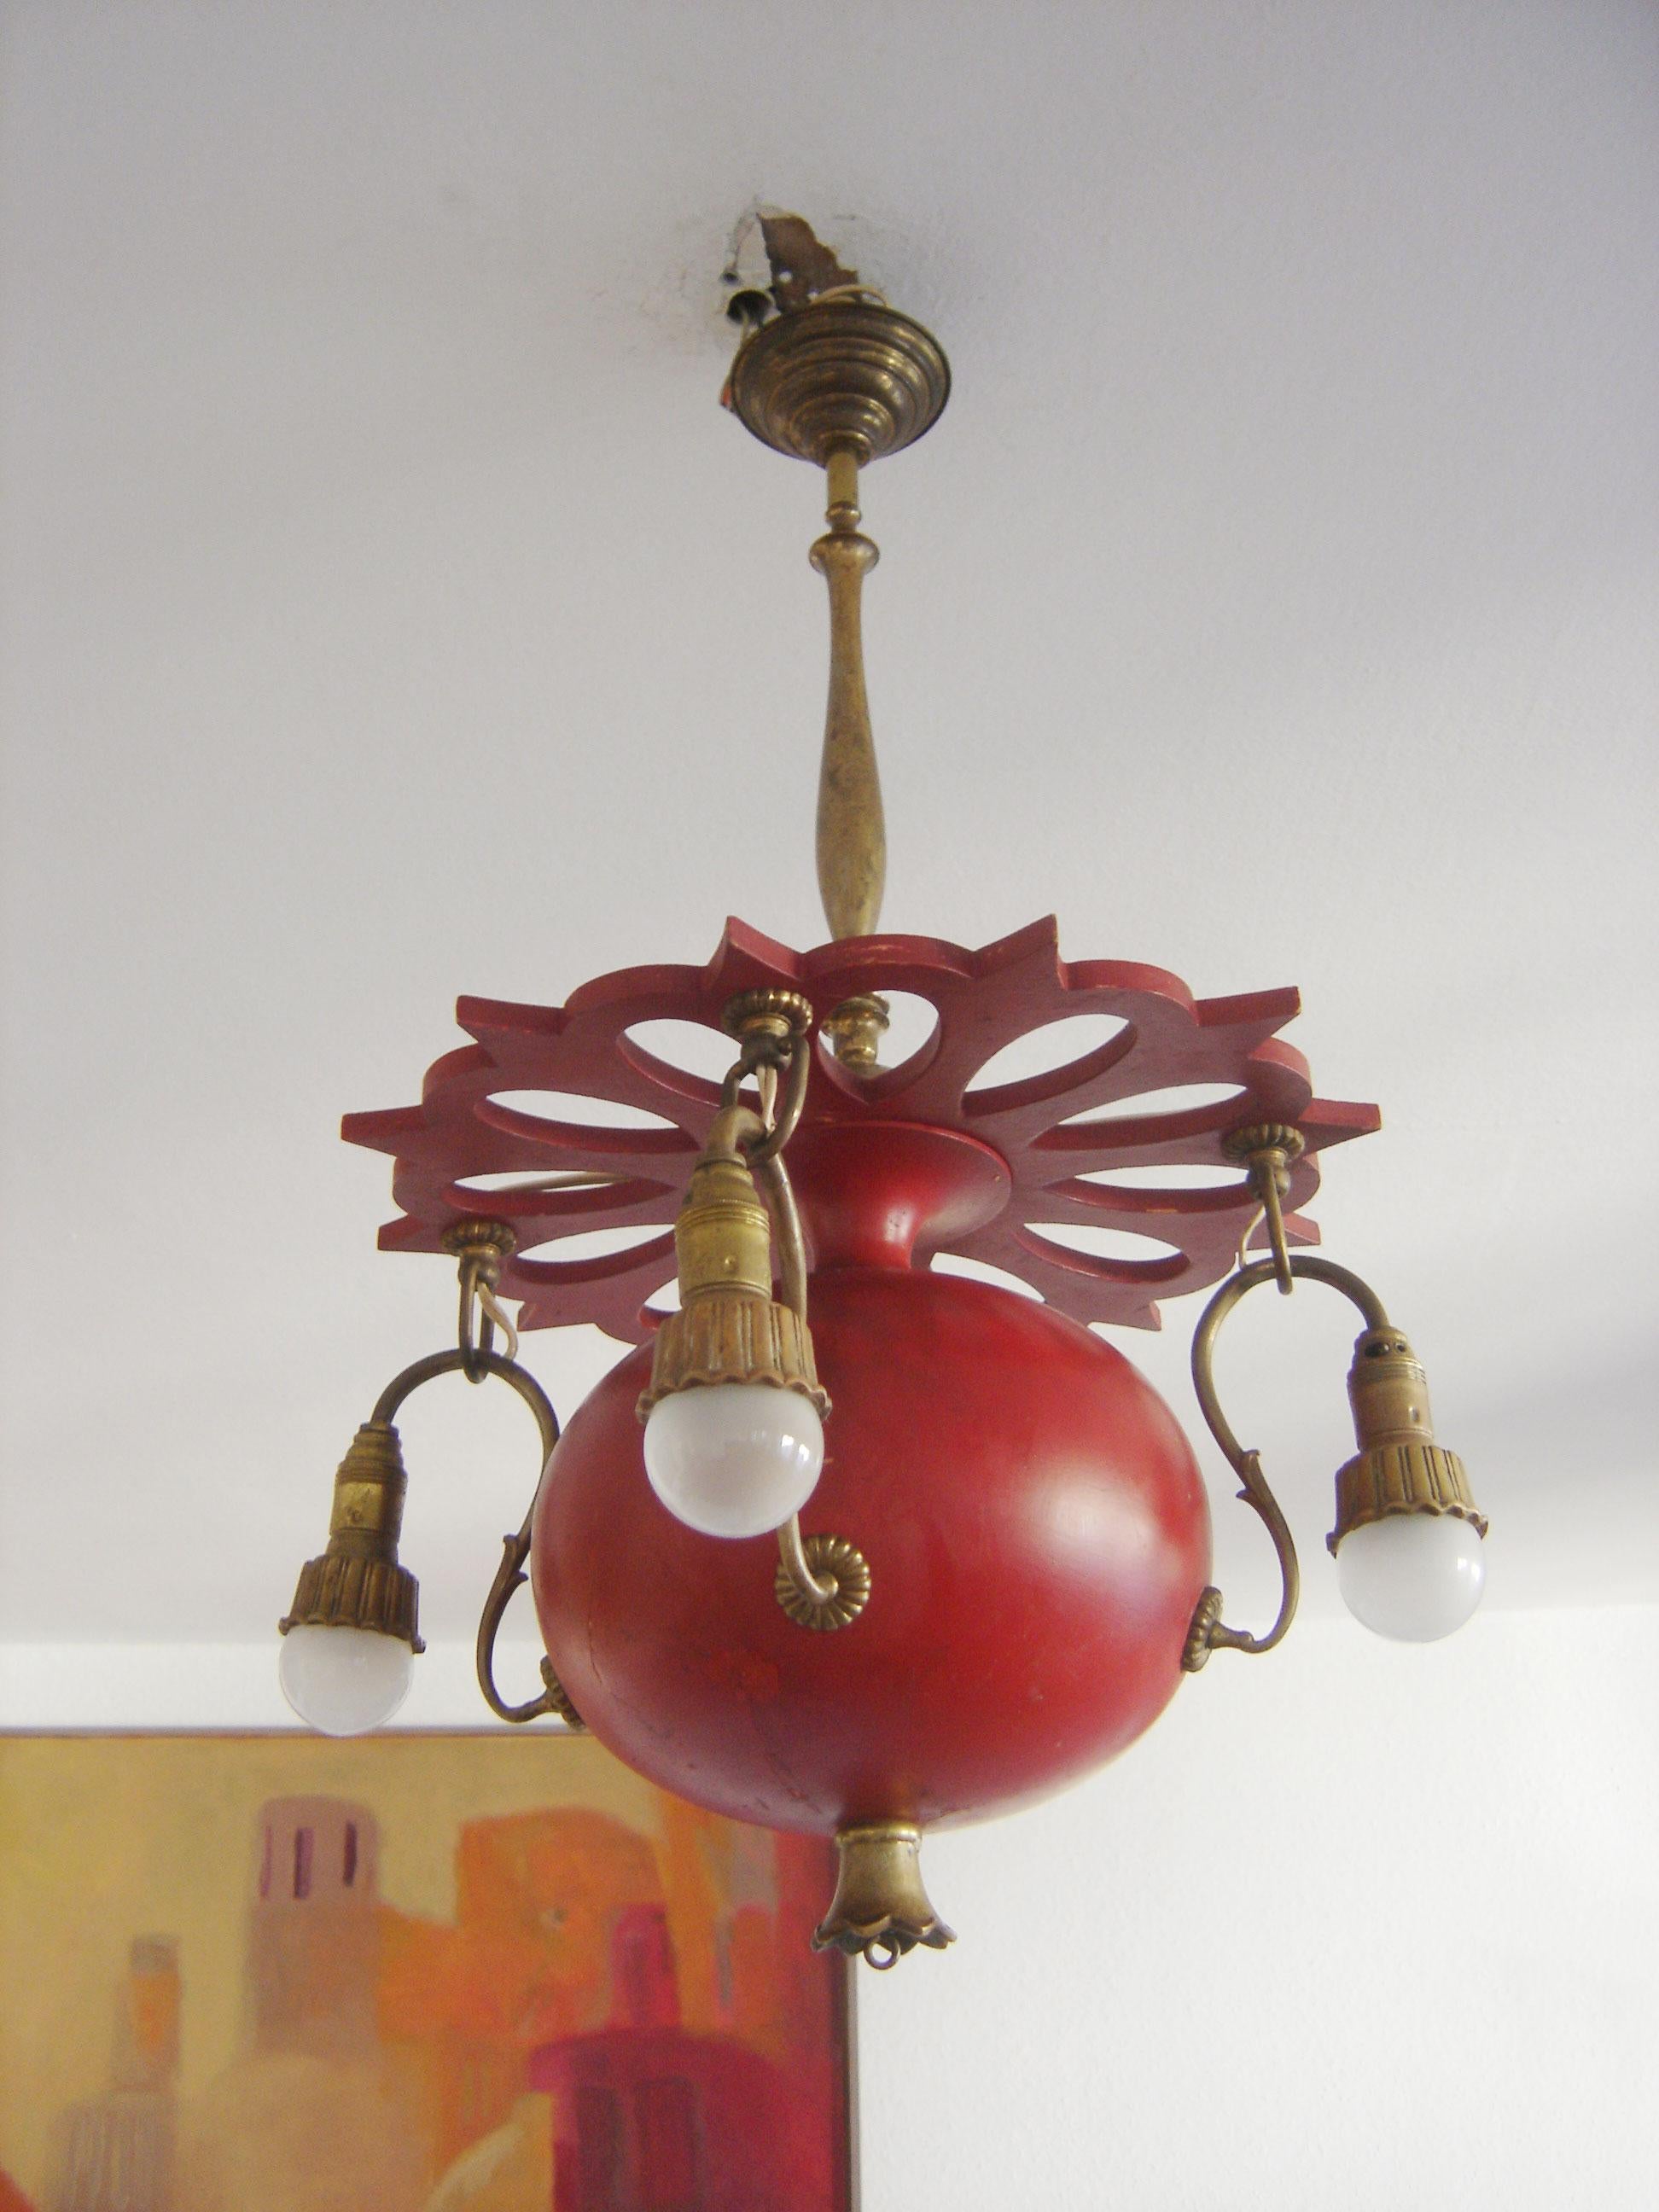 Lacquered Exceptional Art Nouveau Chandelier or Pendant Lamp 'Granate Apple', 1900 Germany For Sale